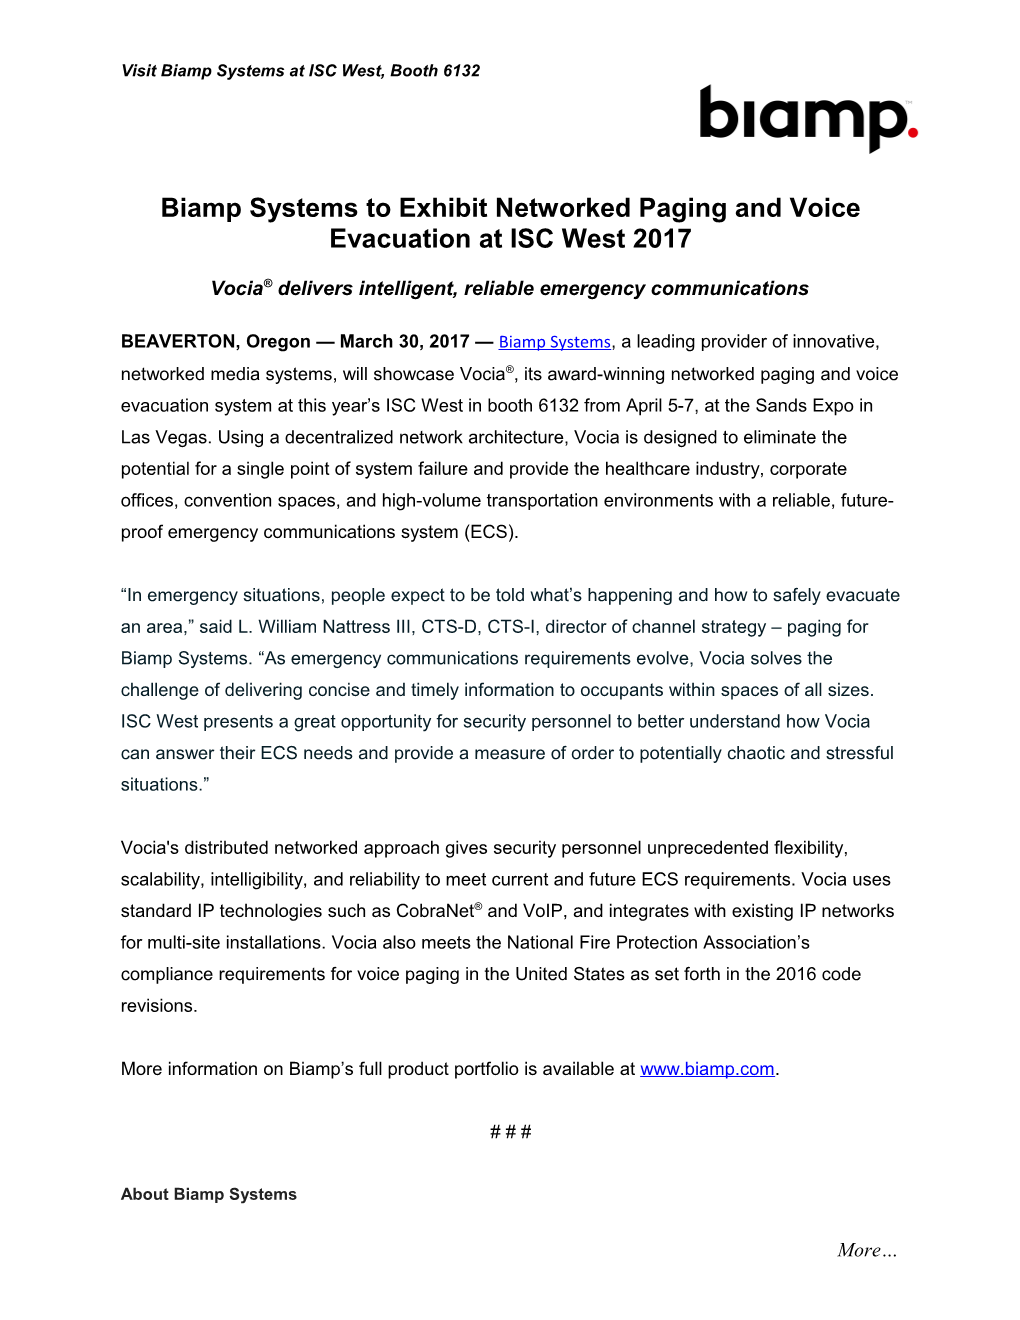 Biamp Systemsto Exhibit Networked Paging and Voice Evacuation at ISC West 2017